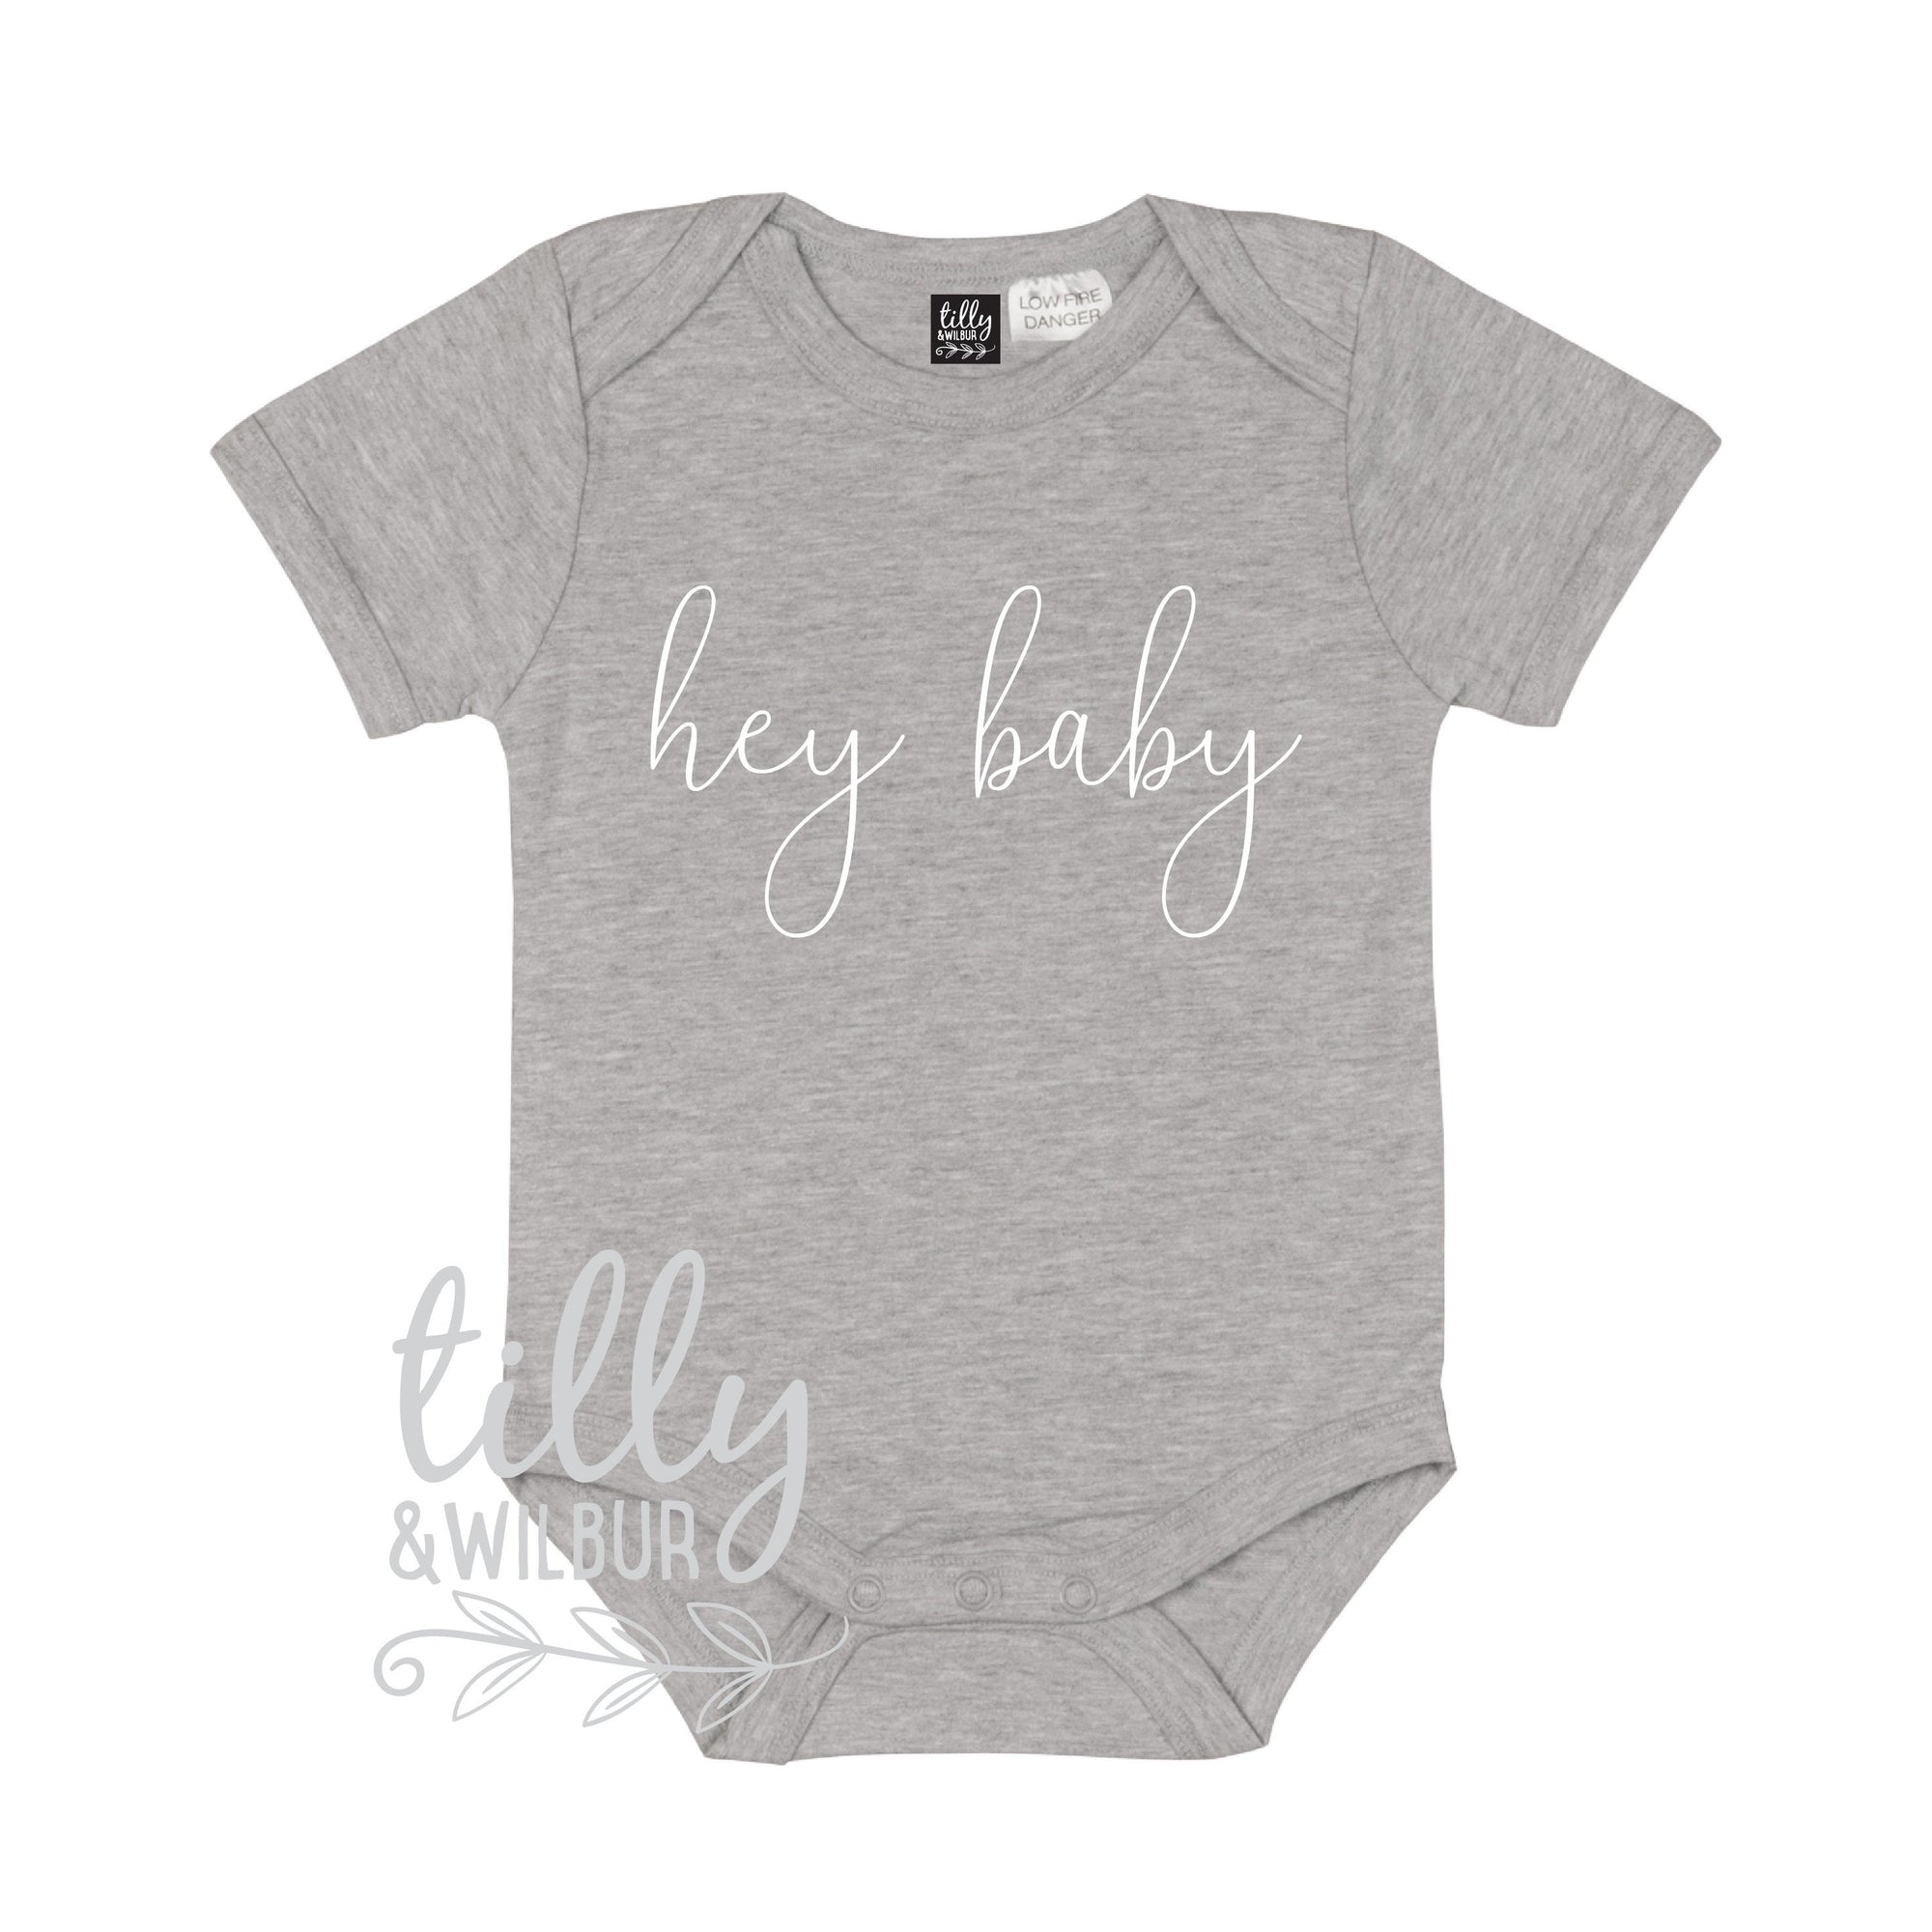 Hey Baby Bodysuit For New Arrivals, Hey Baby Newborn Gift, Newborn Gift, New Baby Gift, Unisex Baby Shower Gift, Pregnancy Announcement Gift